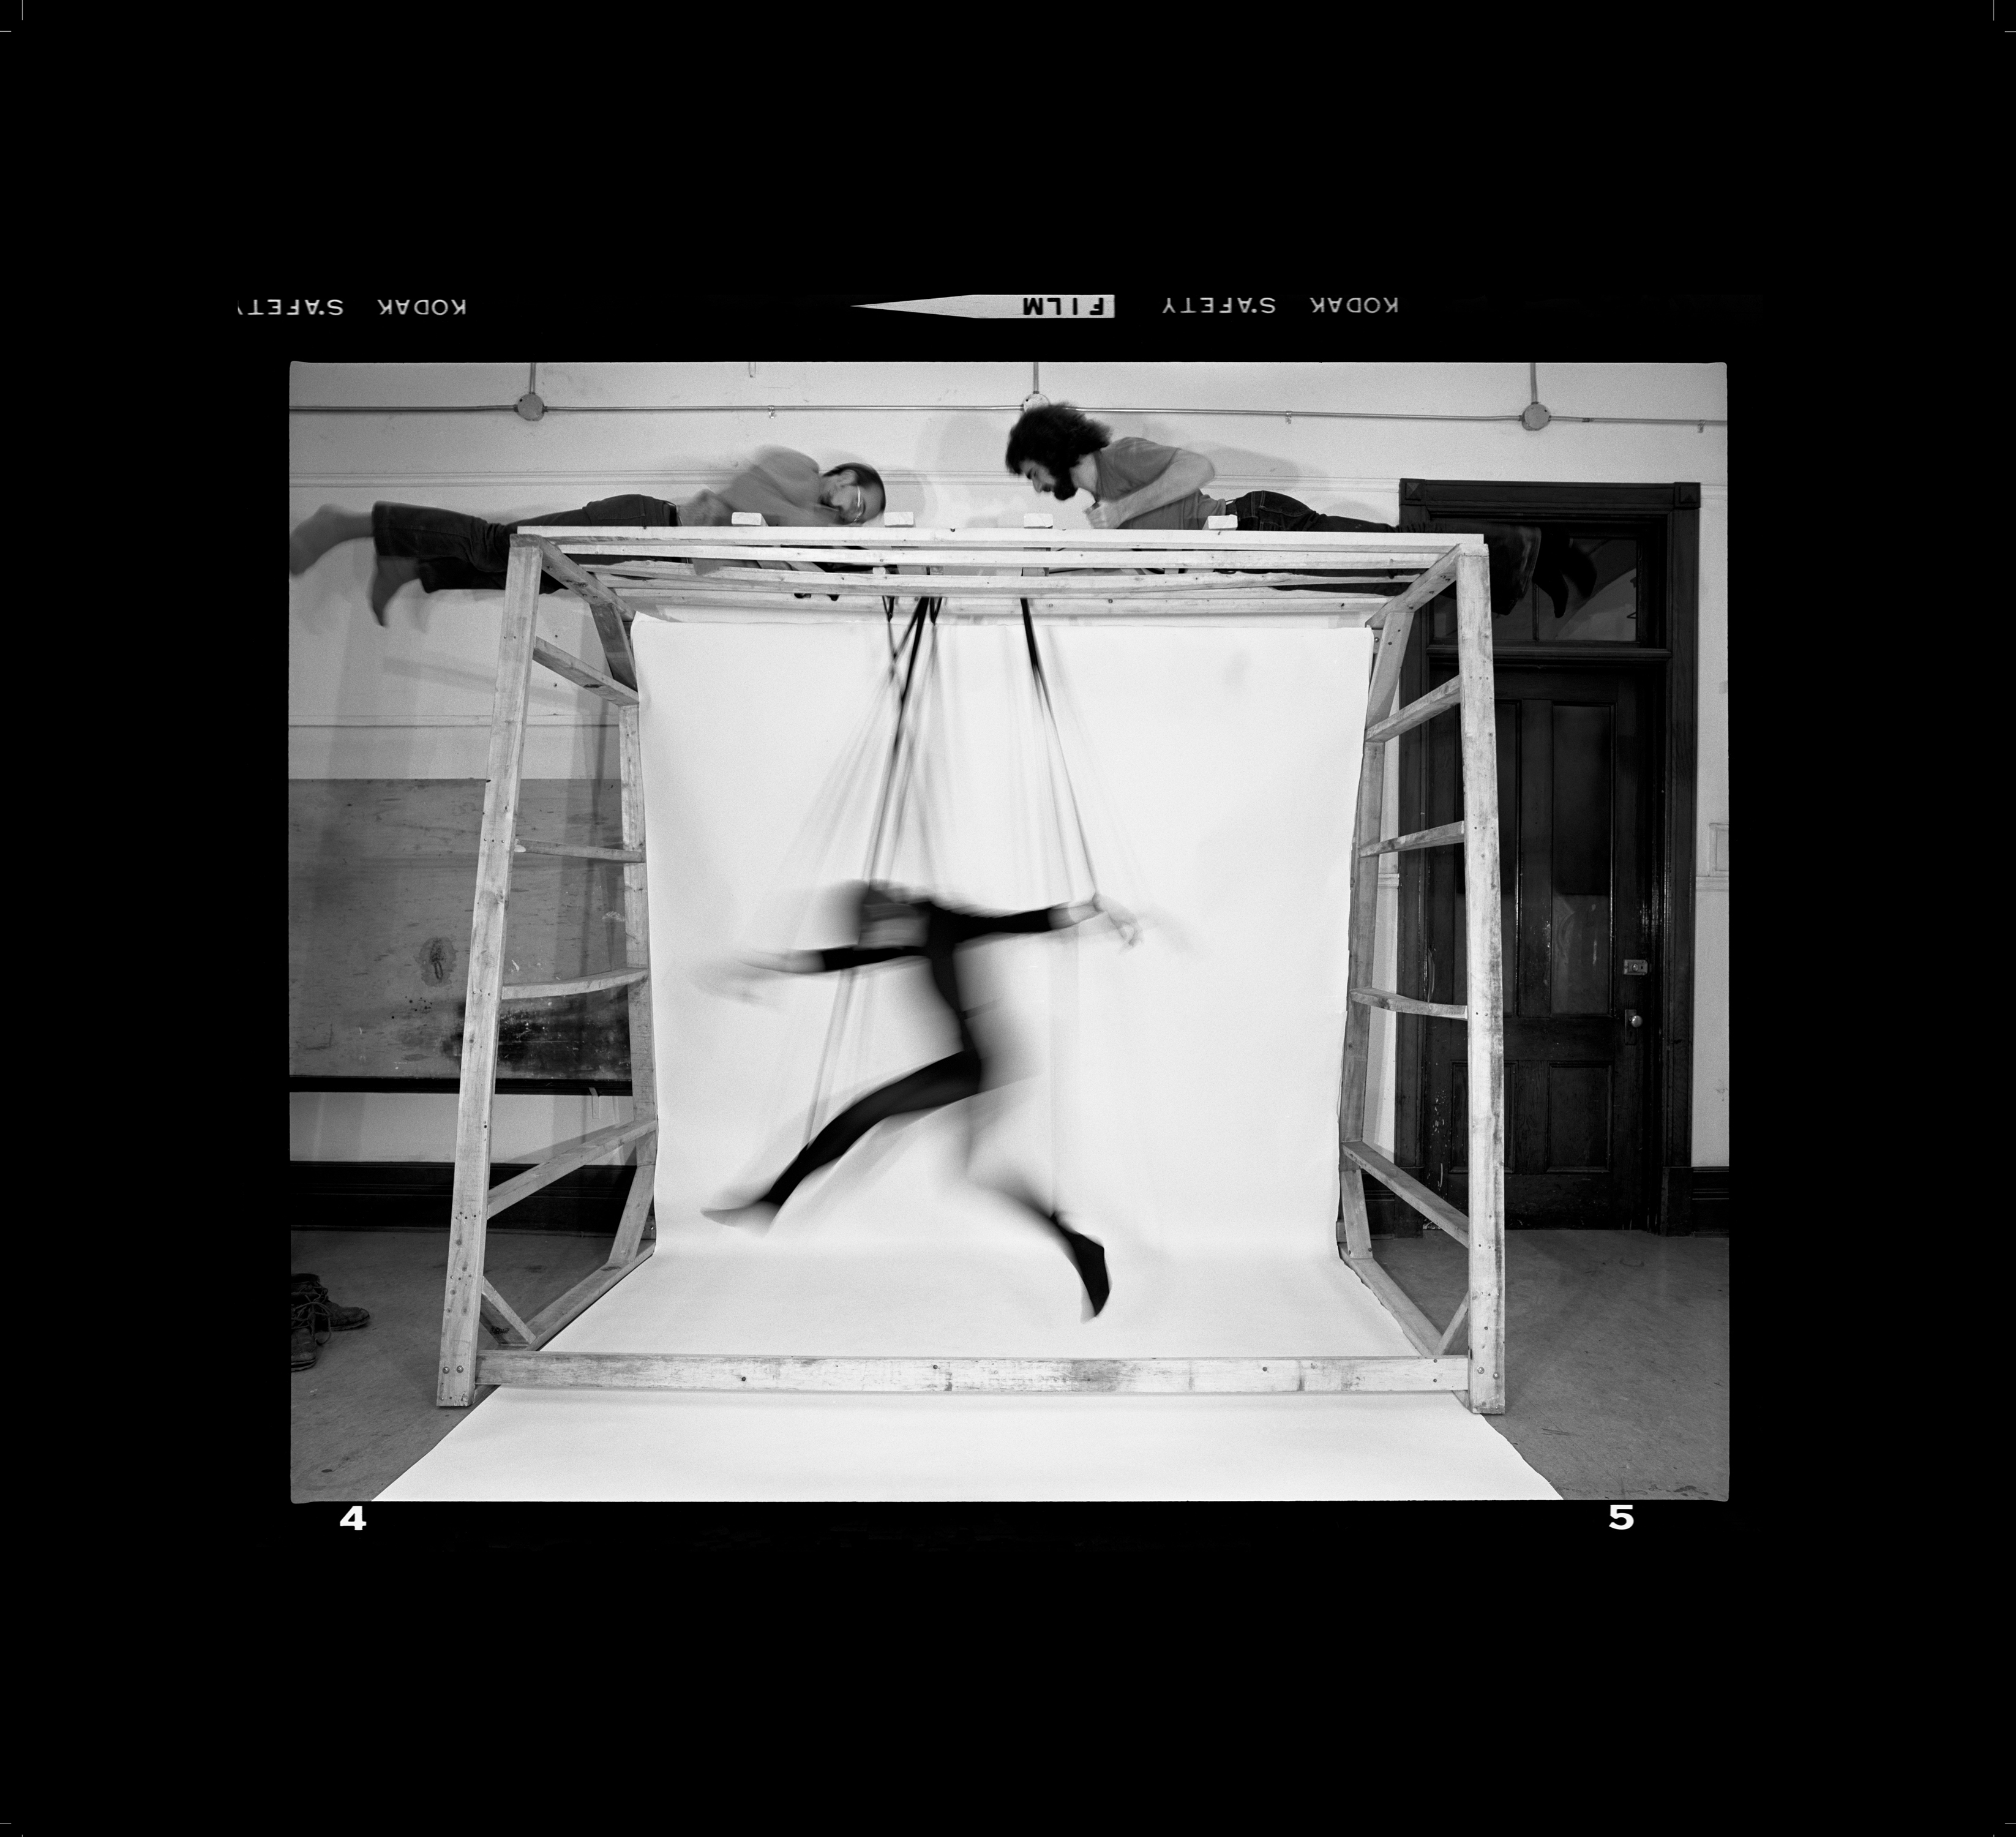 Black and white photo of Choreographed Puppet #4.5 by Suzy Lake. This artwork depicts a body form suspended by wires, imitating that of a puppet. The background appears to be some sort fo room with painted bricks similar to that of the inside of a school.